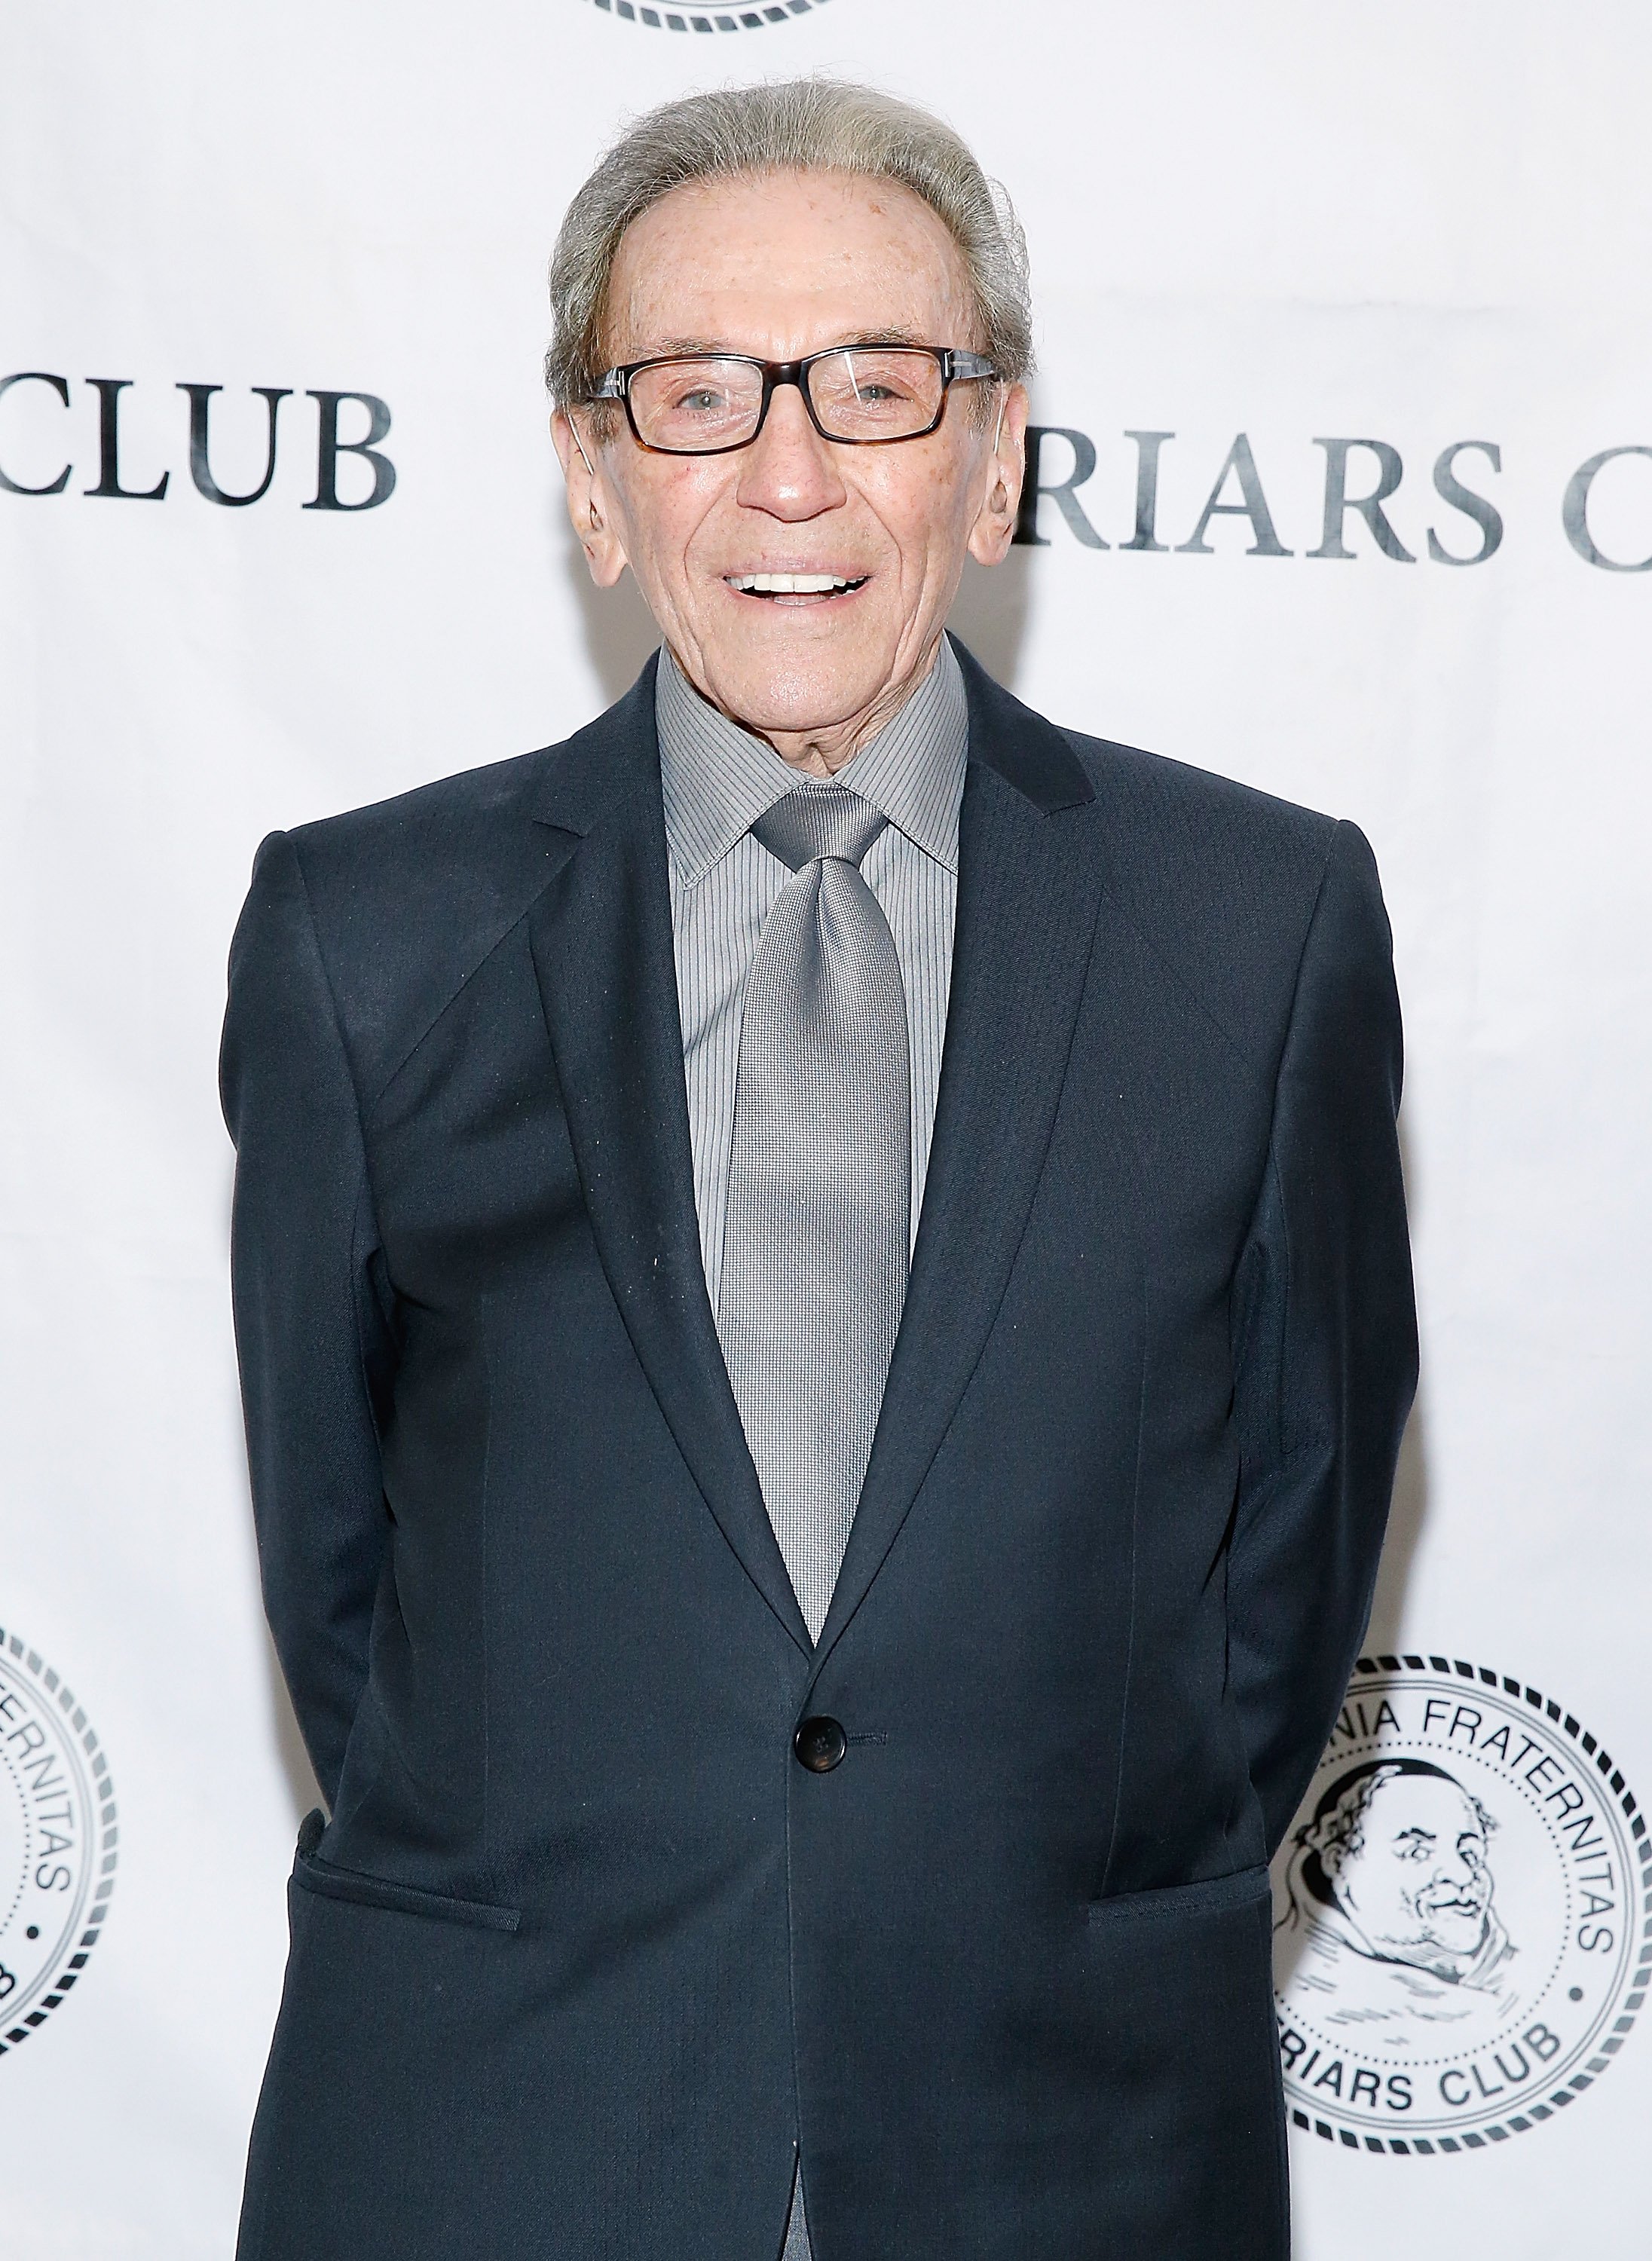 Norm Crosby attends The Friars Club Salute on April 21, 2014, in New York City. | Source: Getty Images.